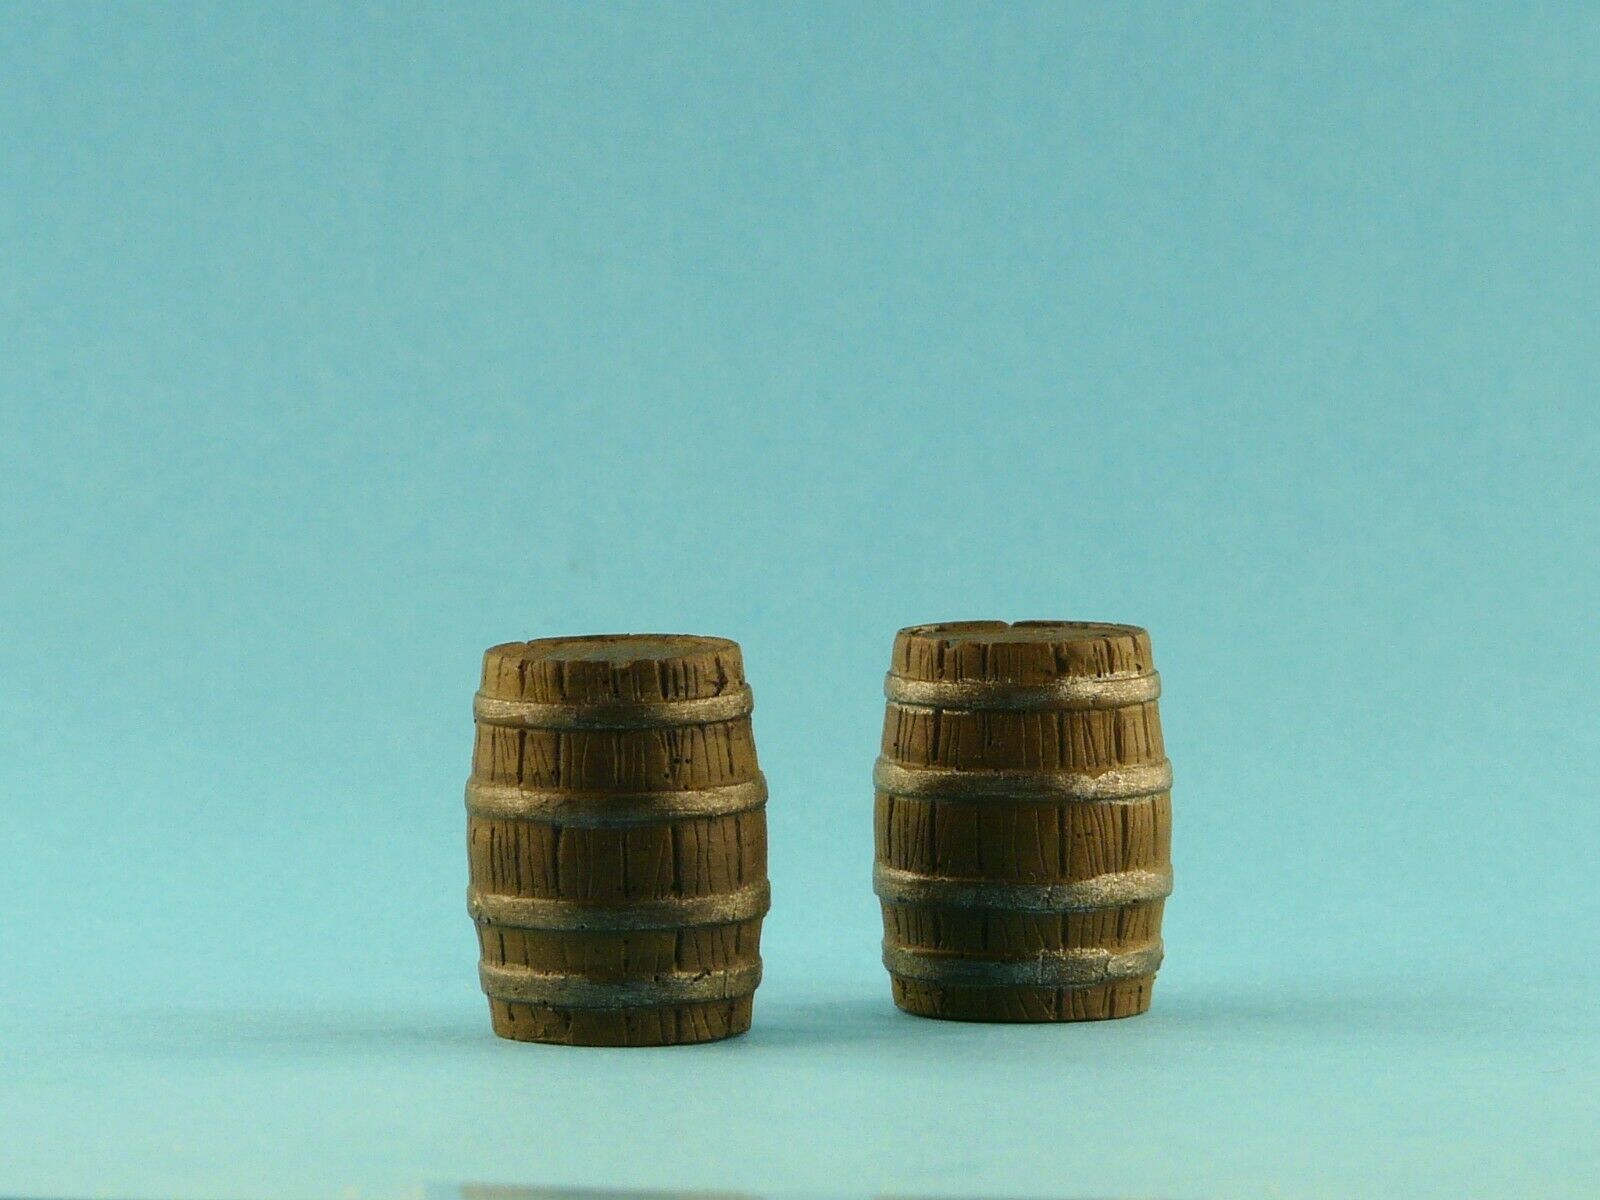 1/48 Beer Barrels Kit Scale Modelling Stowage & Diorama Accessories - redoguk